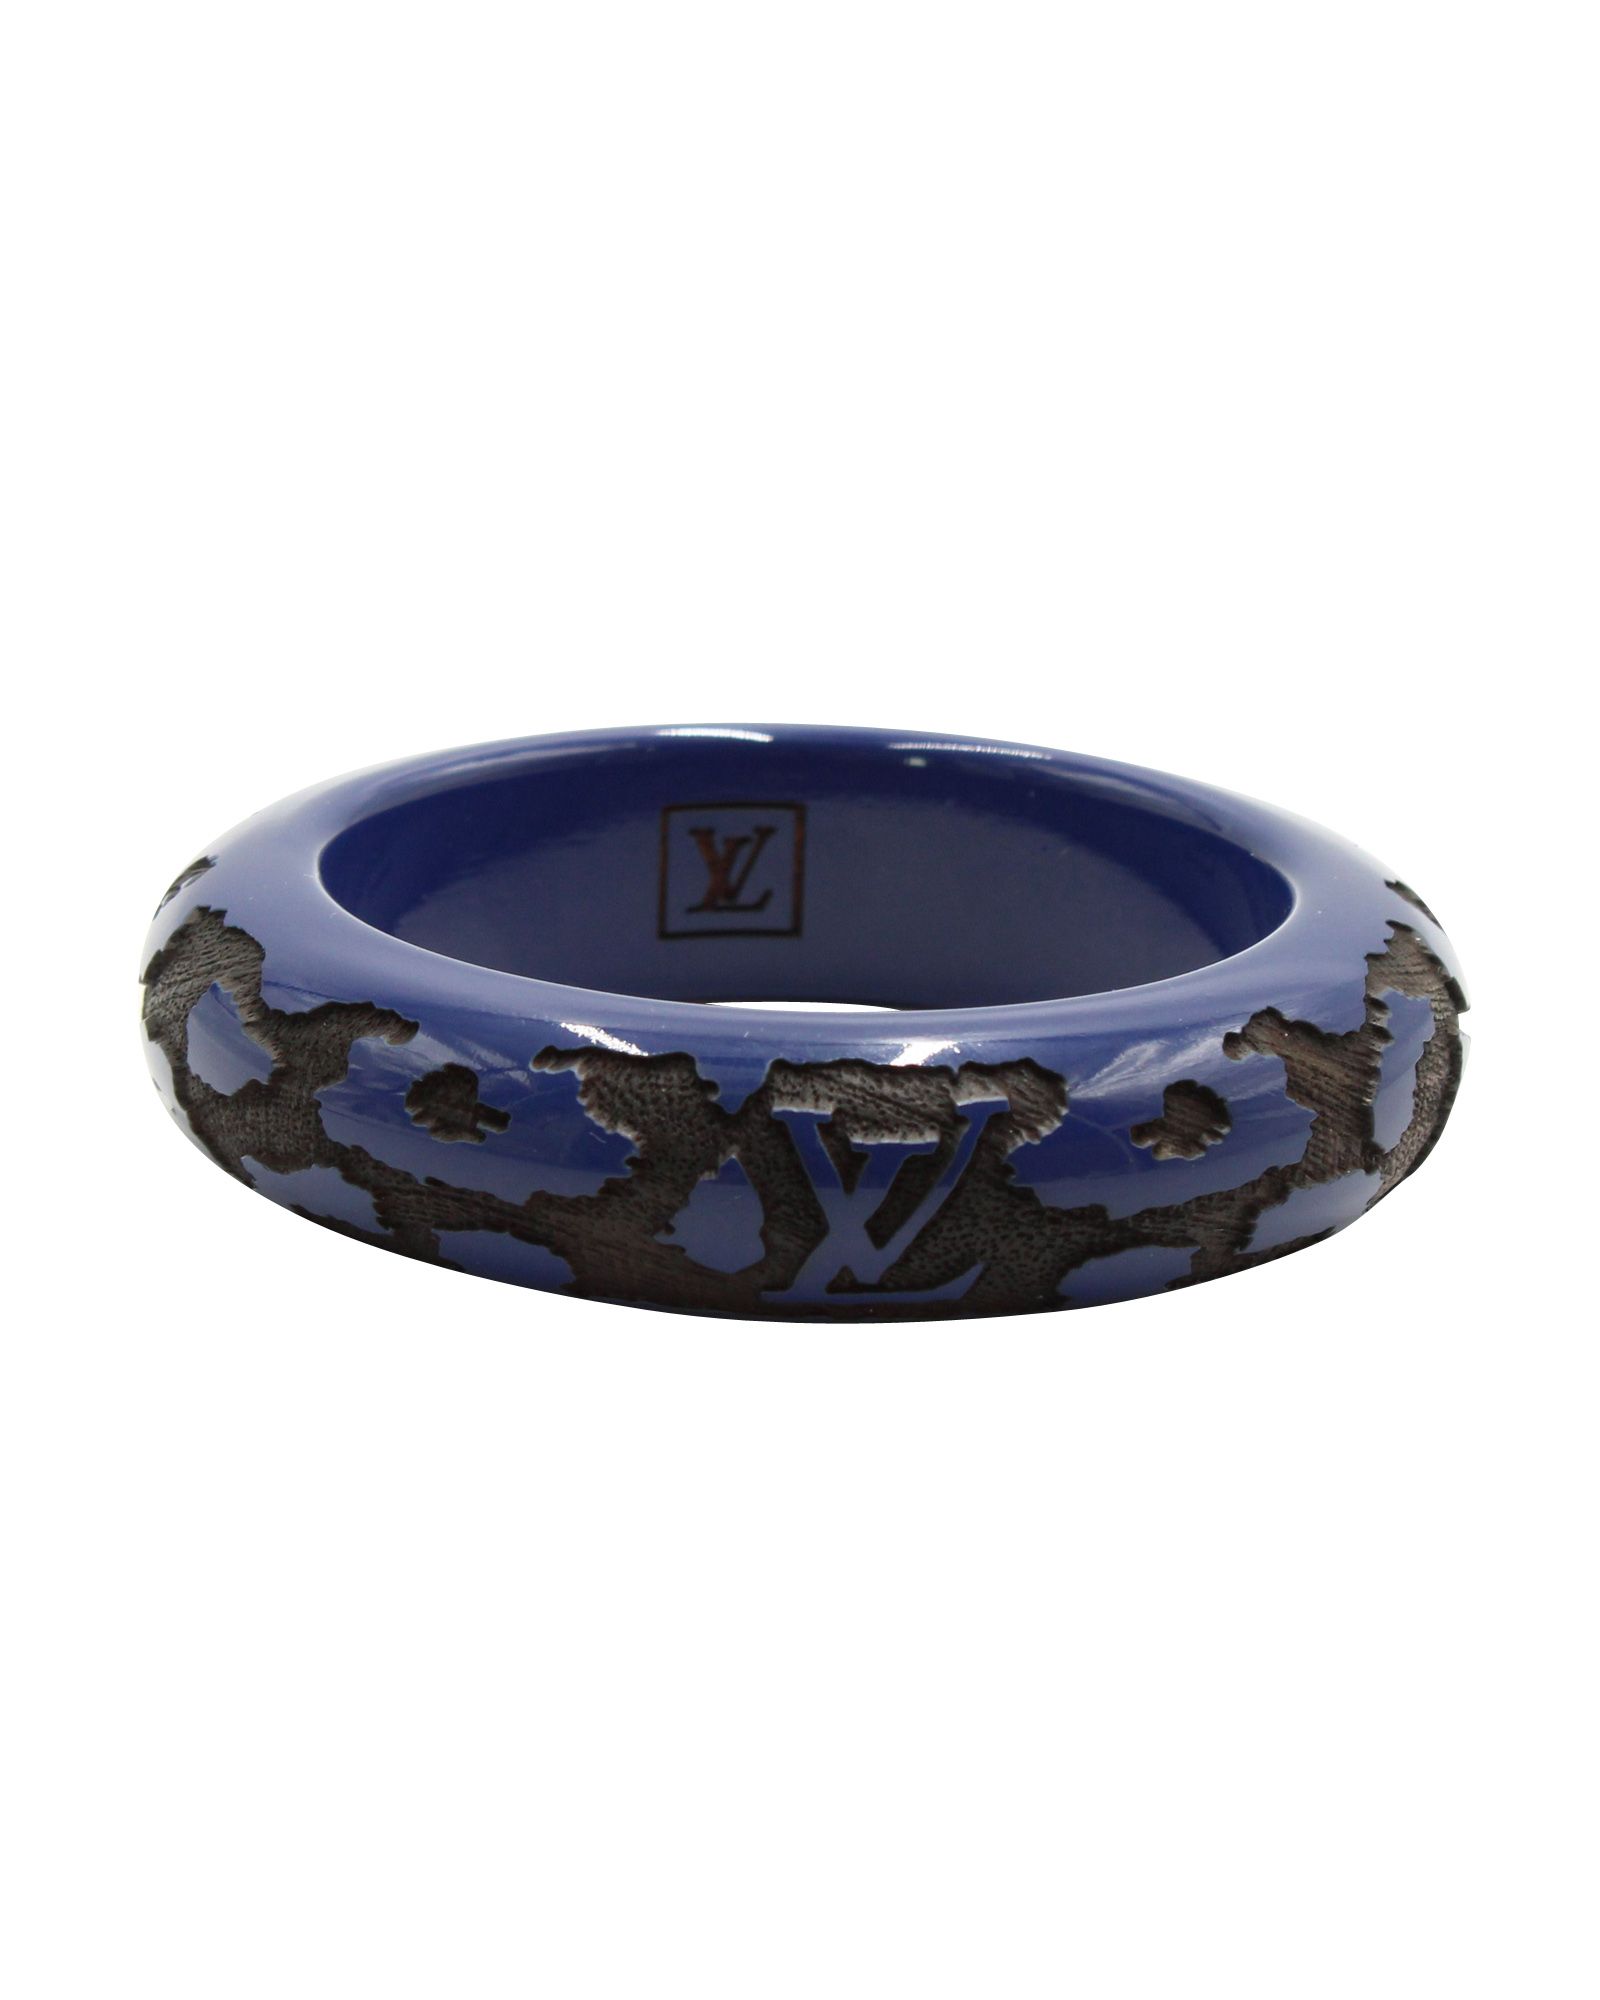 VINTAGE, RRP AS NEW
This gorgeous Spring/Summer 2009 Louis Vuitton Lacquer Wood Leomonogram Bangle Bracelet is a coveted and unique piece that makes a great addition to any jewelry collection. It features a hand-carved leopard print pattern and LV Monogram with a smooth and shiny lacquer finish. This piece is an absolute must-have 

Louis Vuitton LV Logo Leomonogram Bangle Bracelet in Navy Blue Wood
Color: blue | navy blue
Material: wood
Condition: excellent
Sign of wear: No
Size: one size
SKU: 107849   
Dimensions:  Length: 290 mm, Width: 20 mm, Height: 20 mm